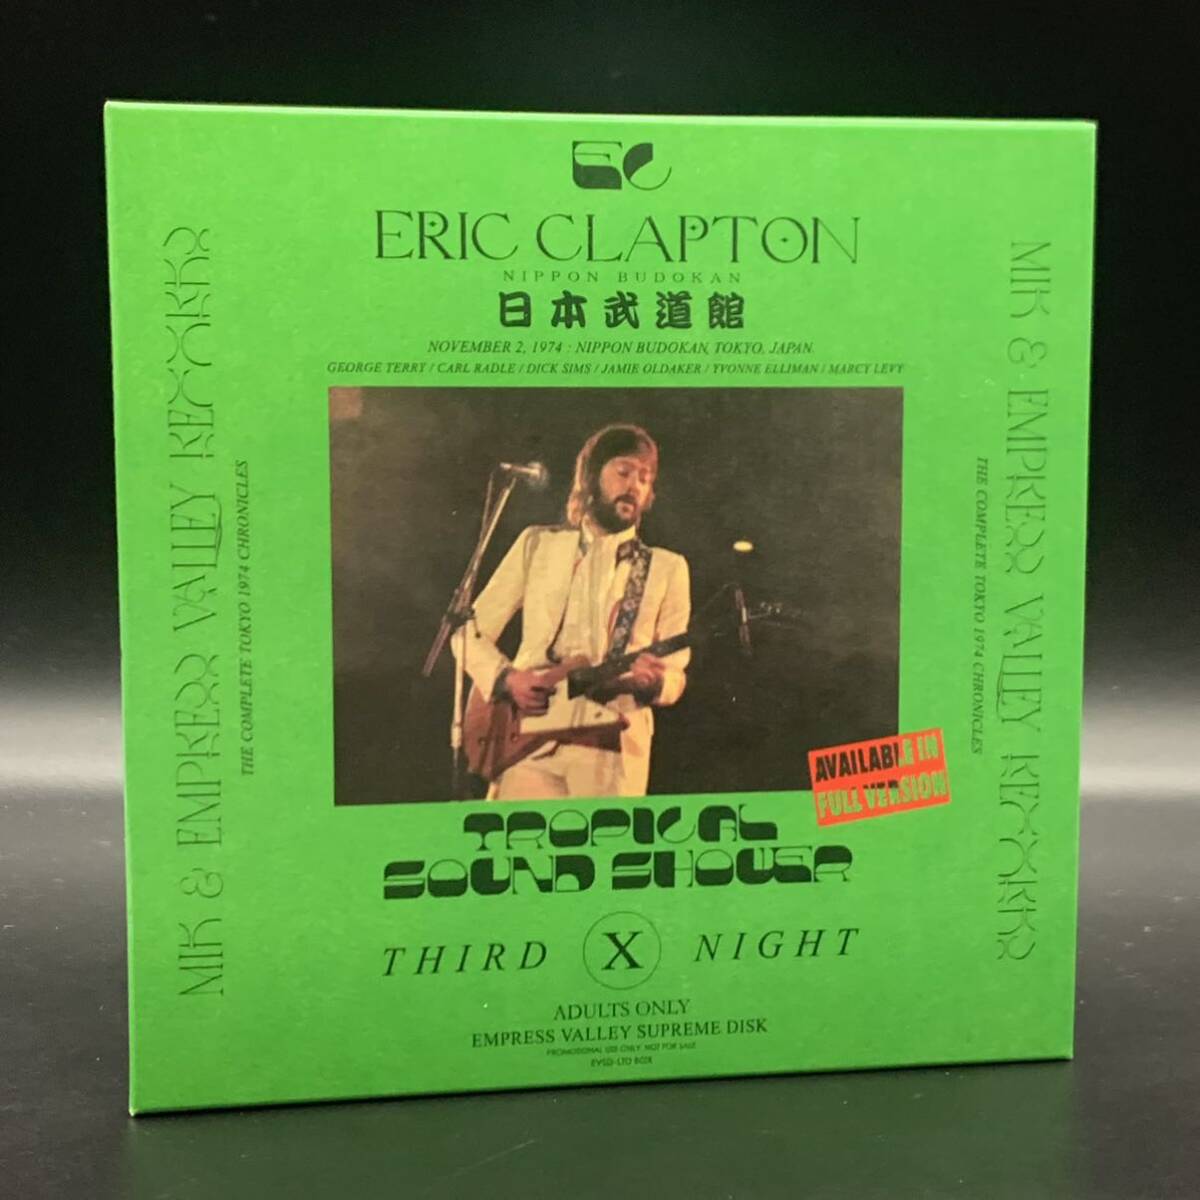 ERIC CLAPTON / TROPICAL SOUND SHOWER「亜熱帯武道館」(6CD BOX with Booklet) 初来日武道館3公演を全て初登場音源で収録の凄いやつ！残少の画像7